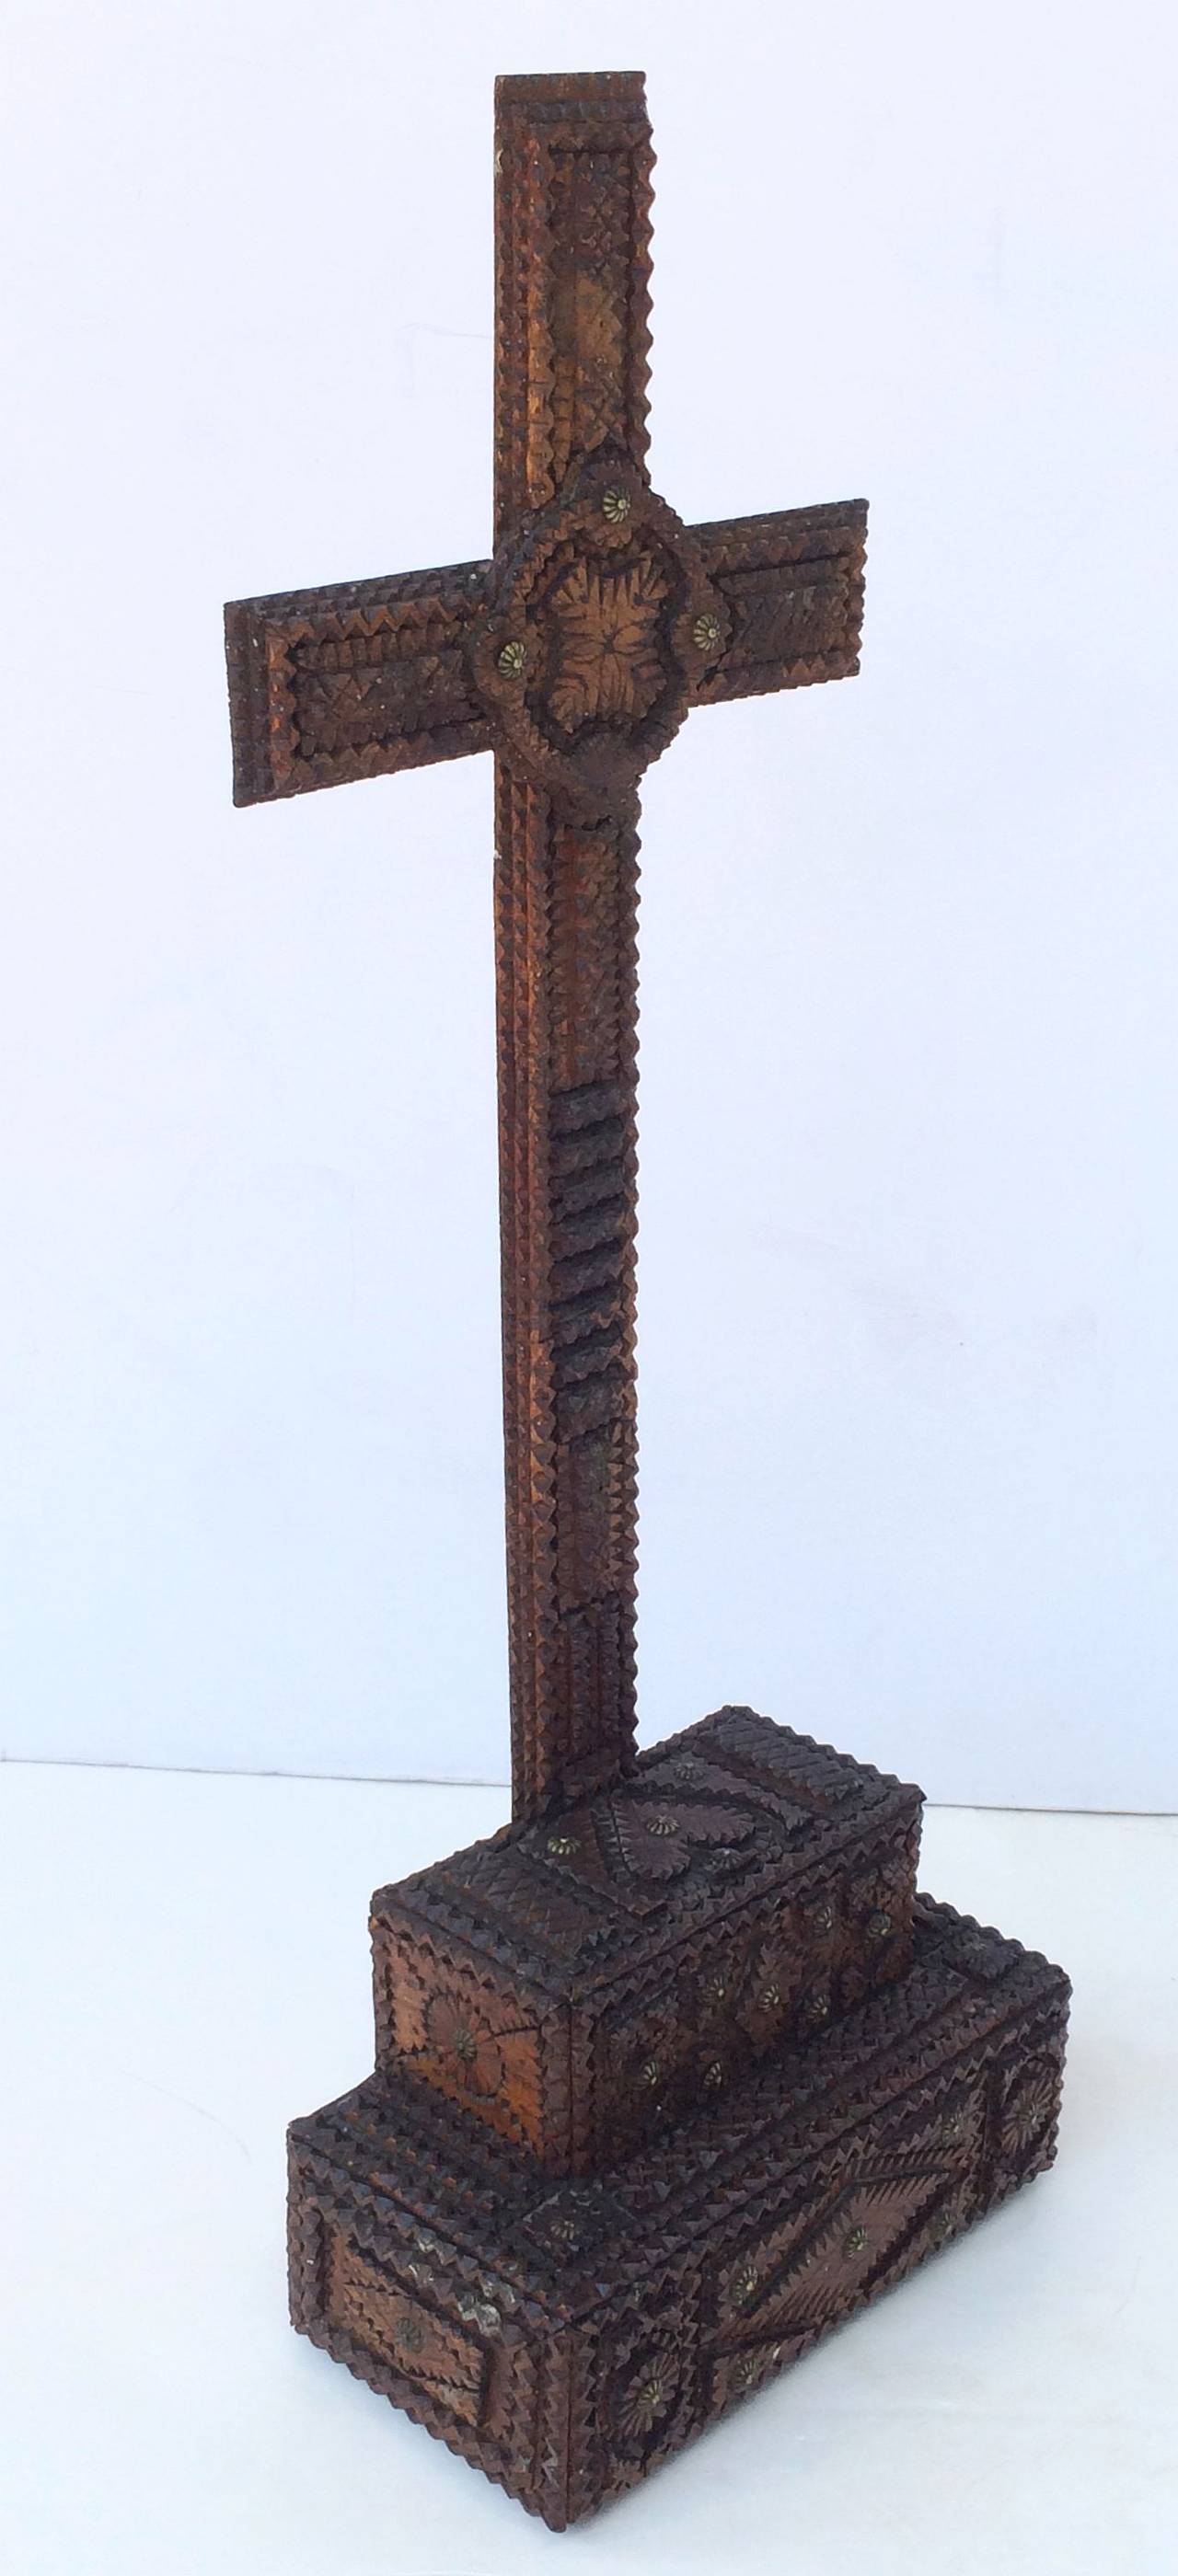 A handsome large Tramp Art crucifix of wood with brass embellishments featuring a cross mounted to a graduated box form for table display.
The whole adorned with ornamental relief designs and a heart on the top of the box mounting.

Dimensions: 